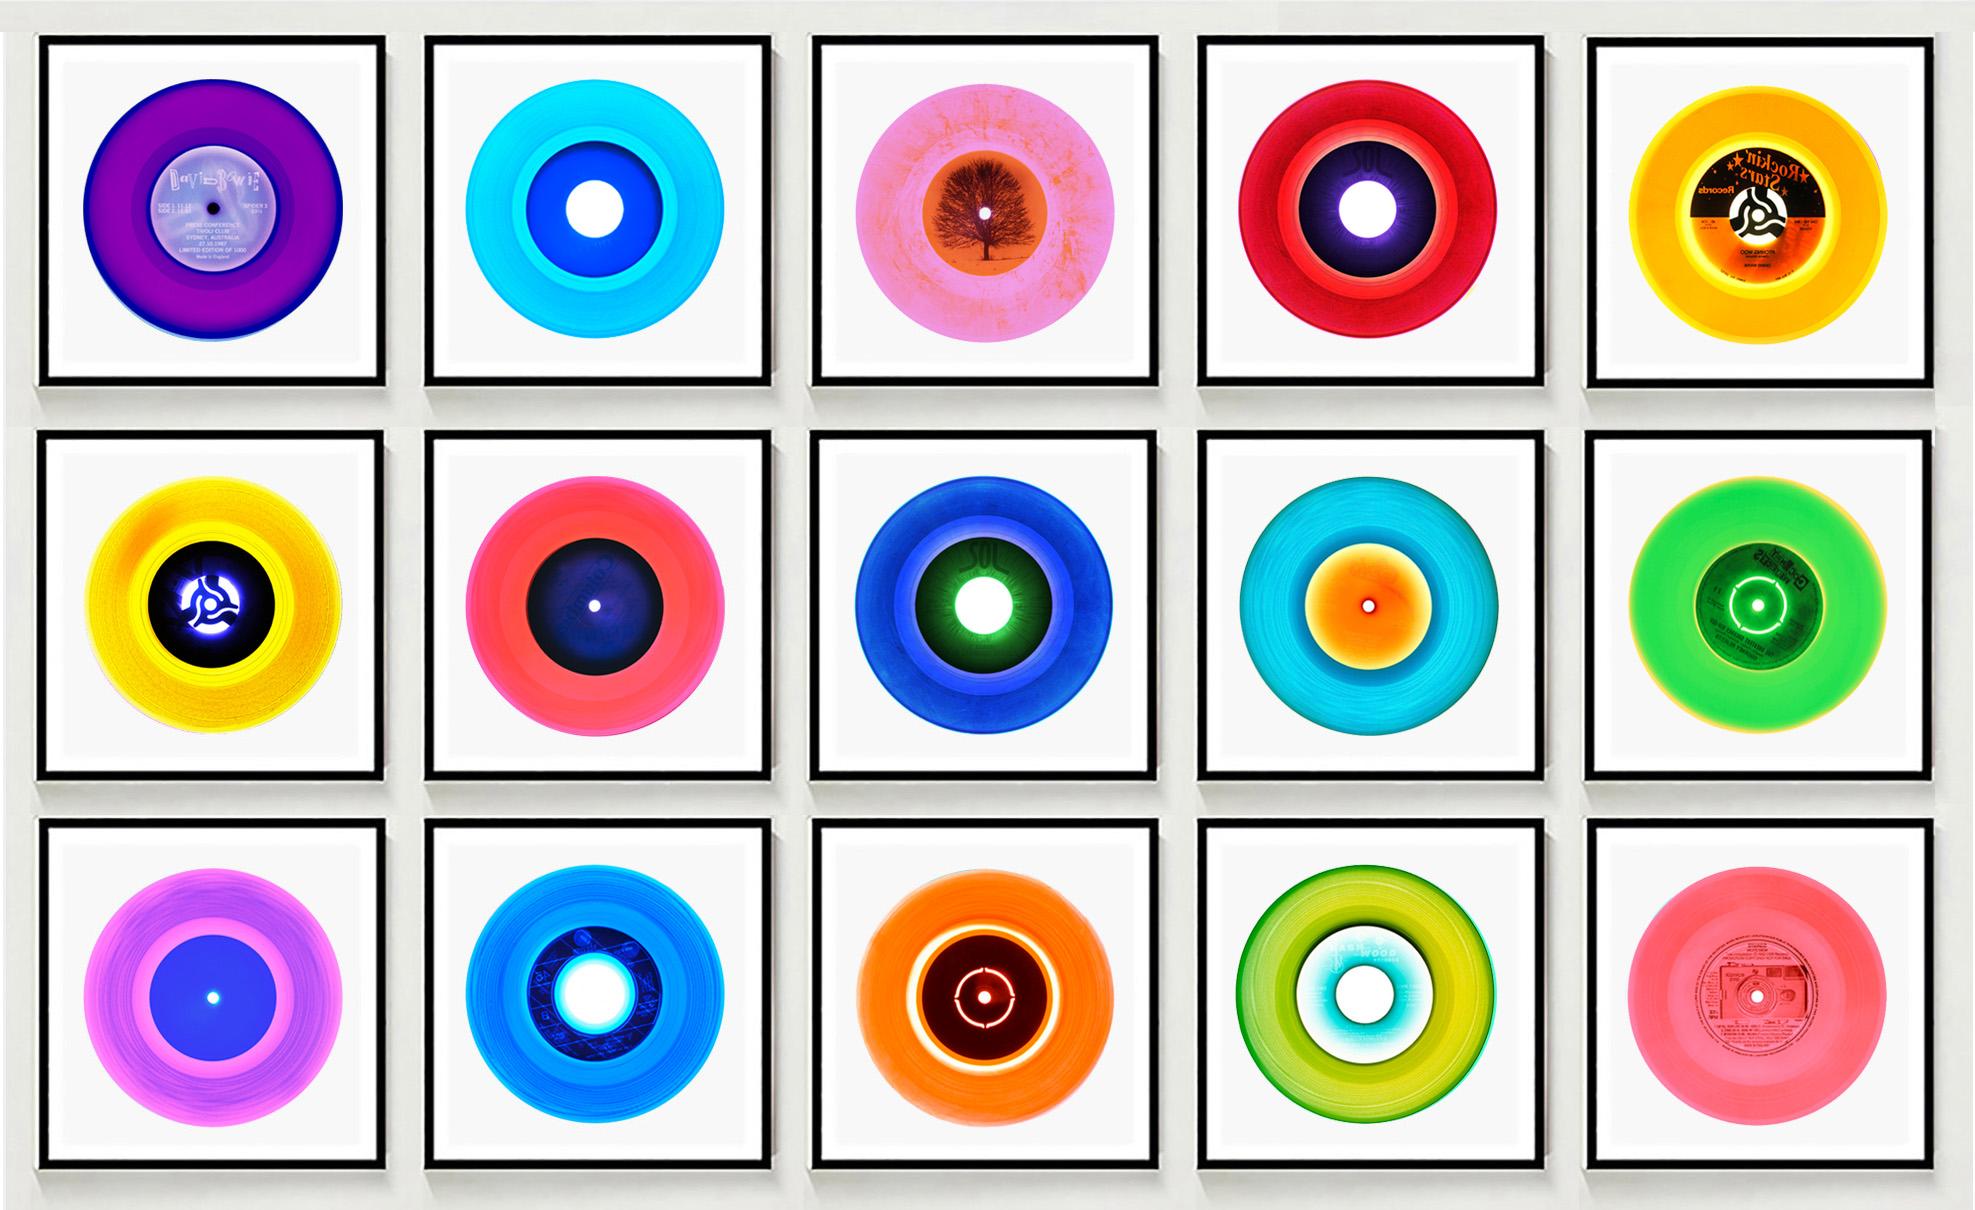 Heidler & Heeps B Side Vinyl Collection Fifteen Piece Installation.
Acclaimed contemporary photographers, Richard Heeps and Natasha Heidler have collaborated to make this beautifully mesmerising collection. A celebration of the vinyl record and